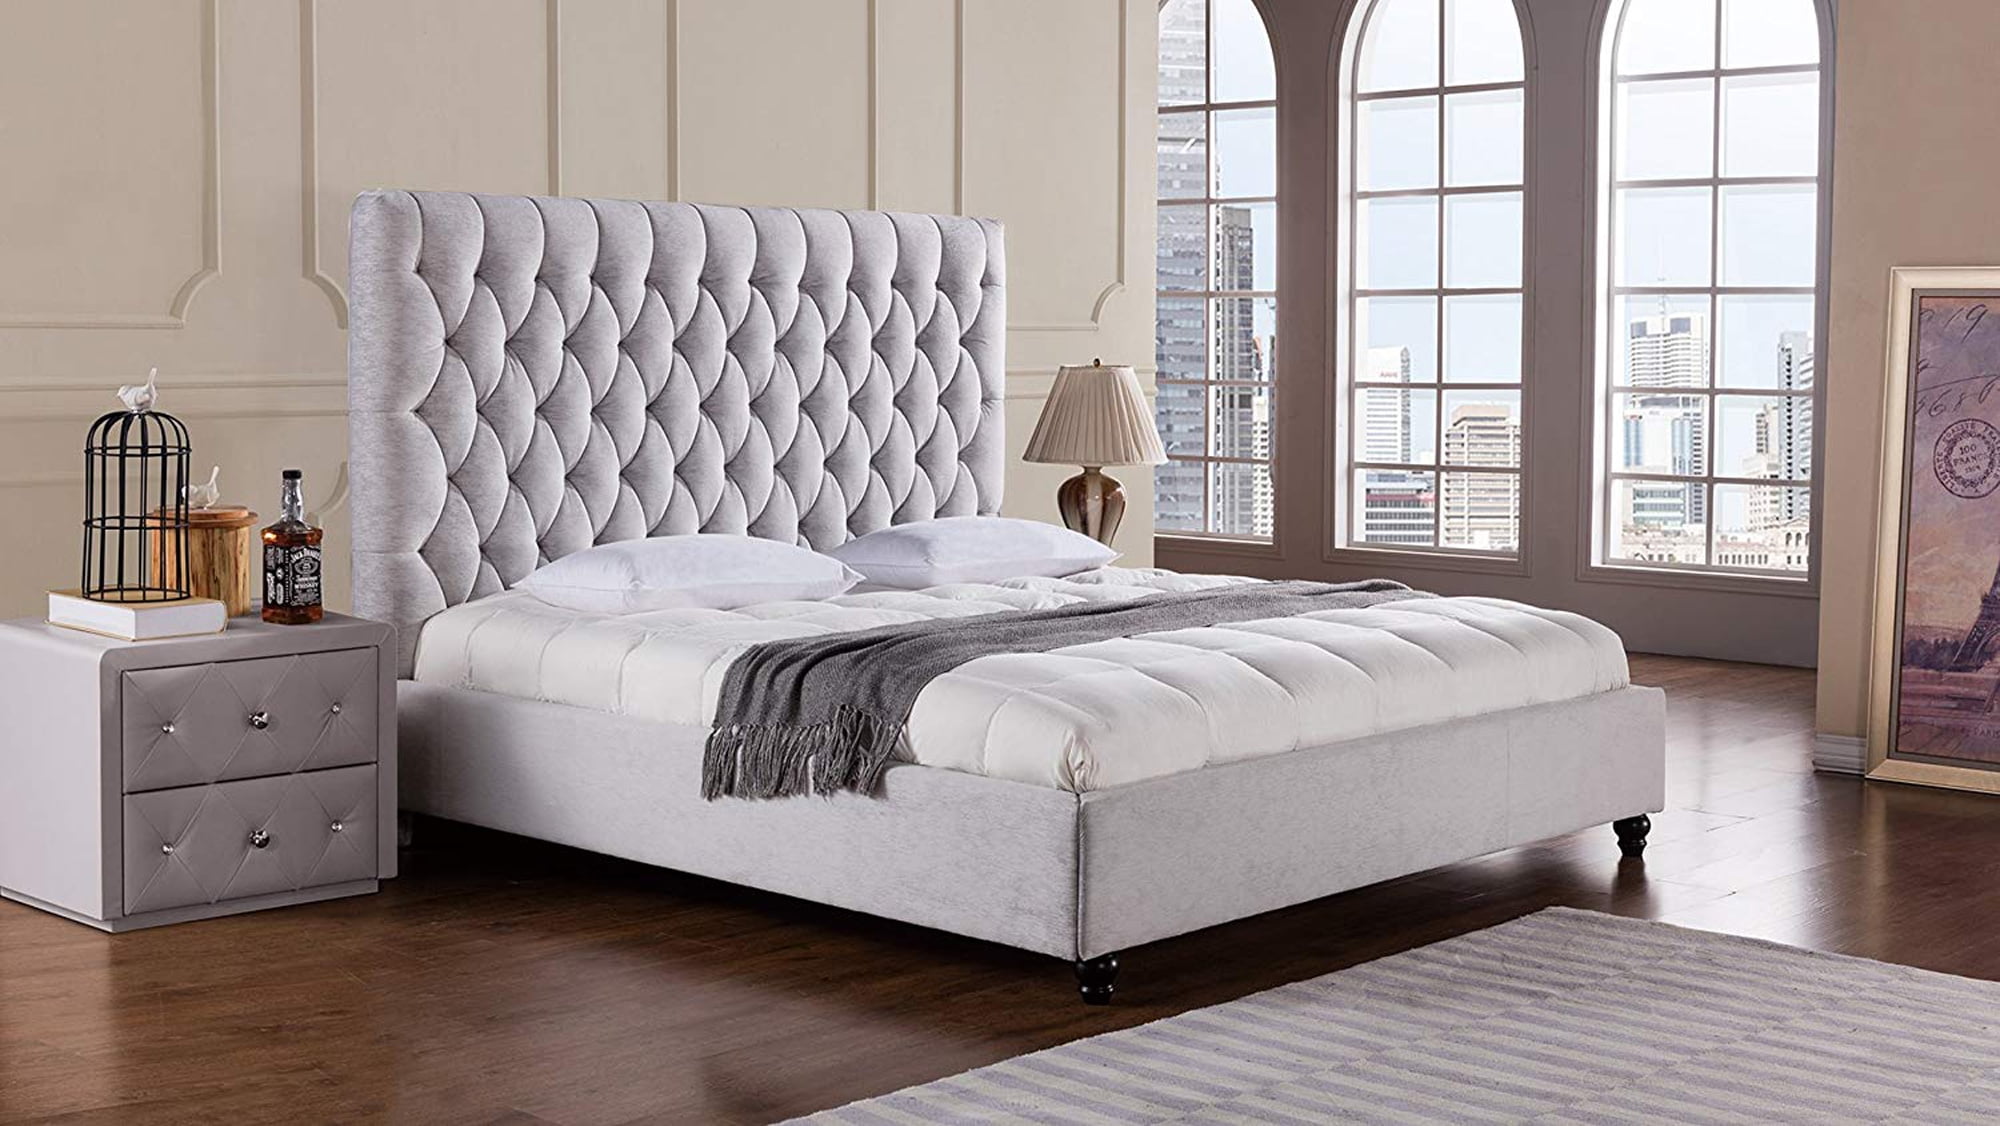 King Size Bedroom Set With Upholstered Headboard ~ Upholstered Baxton ...